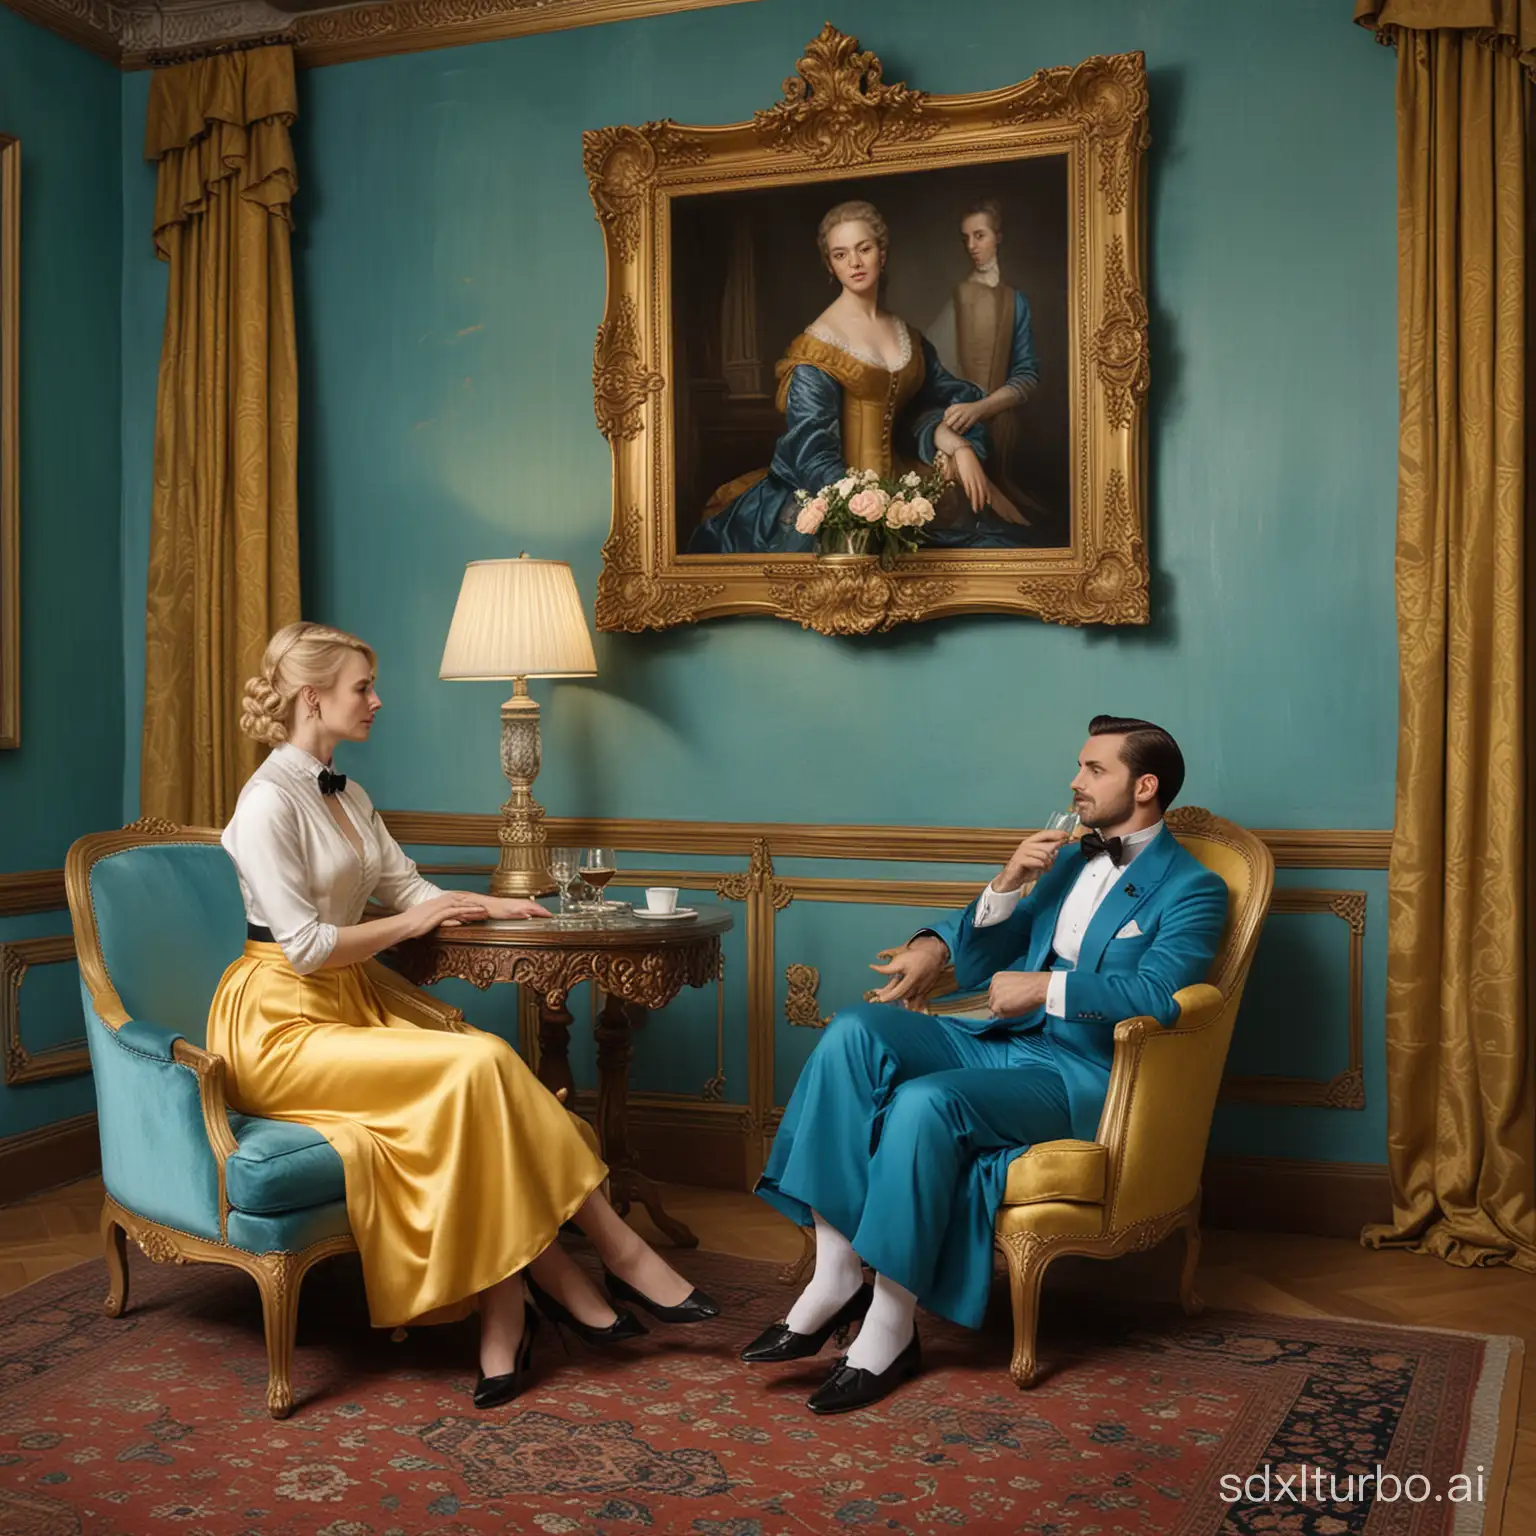 In a realistic painting style, a man dressed in a dark blue suit with a white shirt underneath and a black bow tie with neatly combed hair, and a blonde woman in a long satin yellow dress with long sleeves and a quite plunging neckline and a typical 1950s hairstyle are sitting in vintage duck blue armchairs with golden frames. Each of them holds a cocktail glass: the man holds it in his right hand and the woman holds it in her right hand resting on a small table apparently made of porcelain. The scene is slightly to the right, not completely centered. In the foreground, you can see a round glass table with a huge glass containing the cocktail. The room is quite old and is decorated in turquoise blue, with the lower part in royal blue. There is a painting on the wall between the man and the woman of a Renaissance woman, and other frames on the wall just behind the woman. To the left of the image, you can see a delicate brown curtain. There is a carpet on the floor.